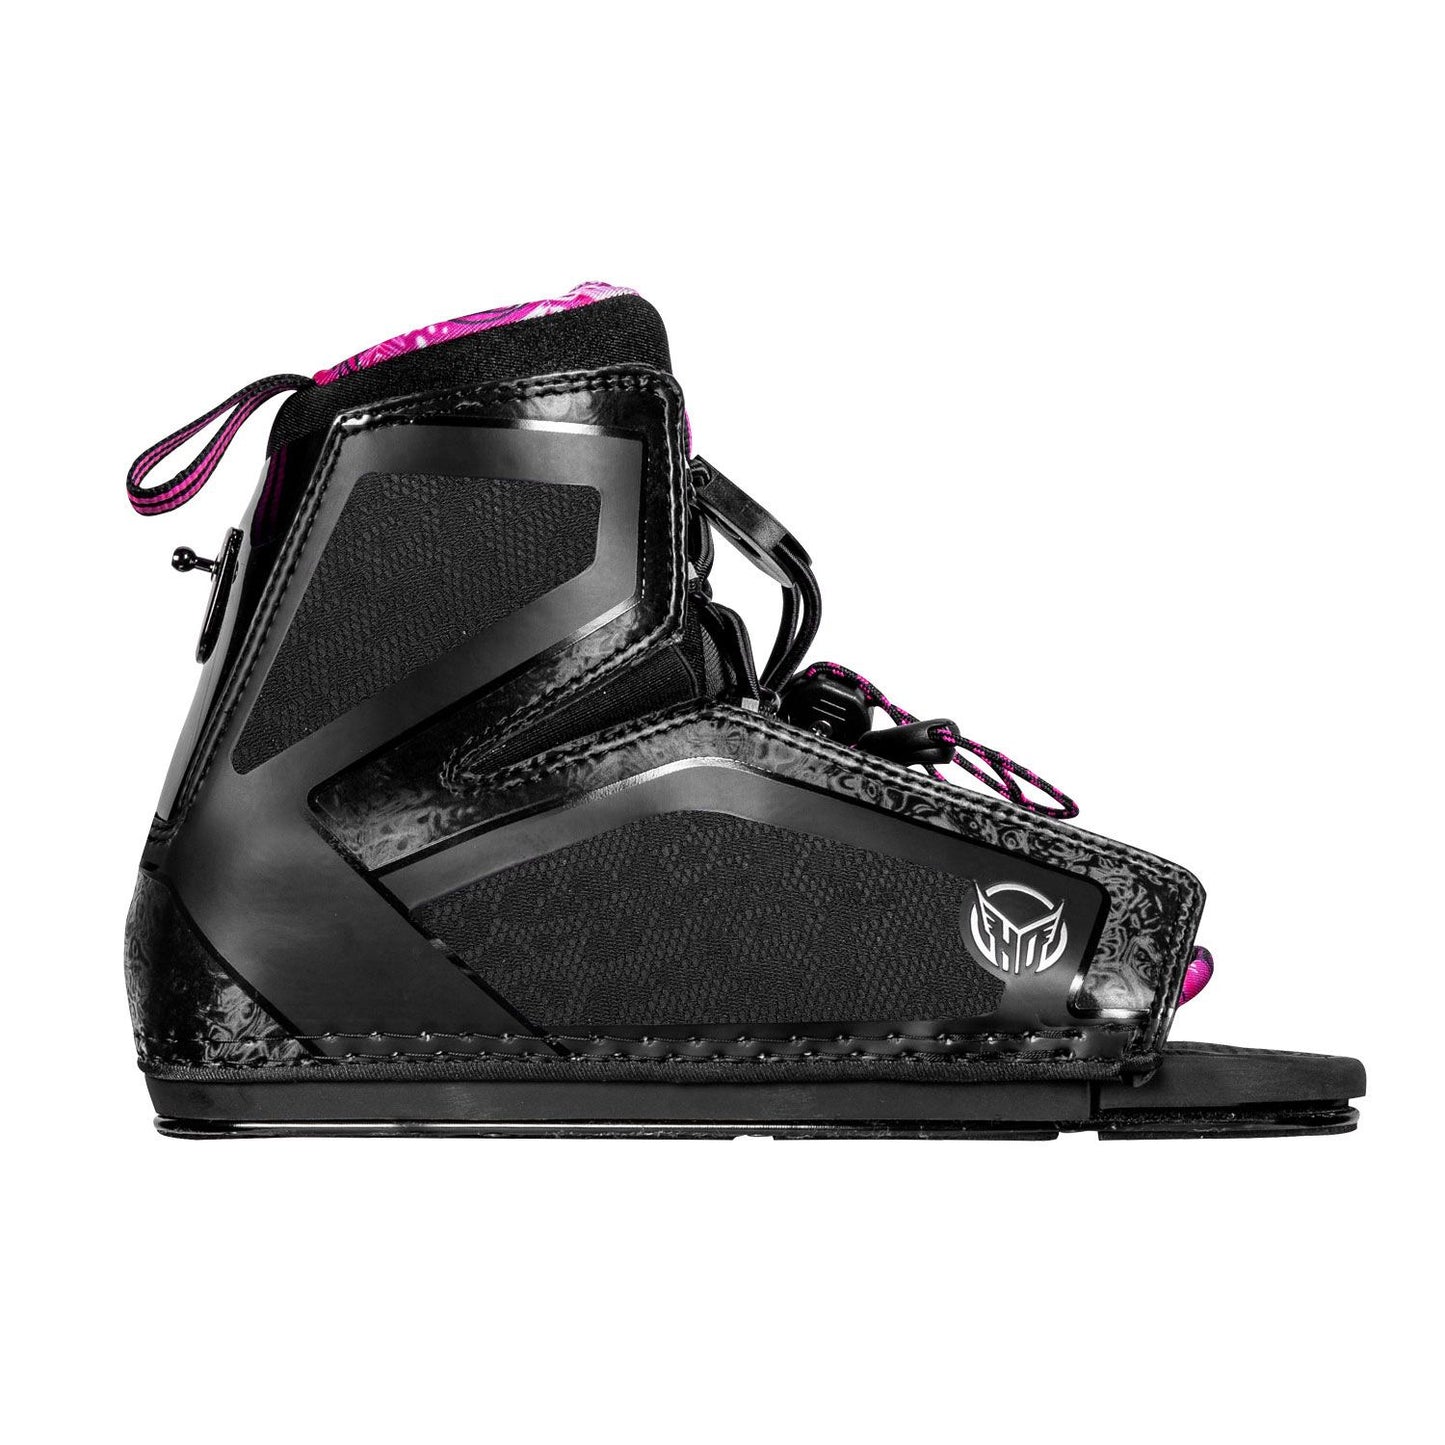 HO Women Stance 110 Direct Connect Water Ski Binding 2021